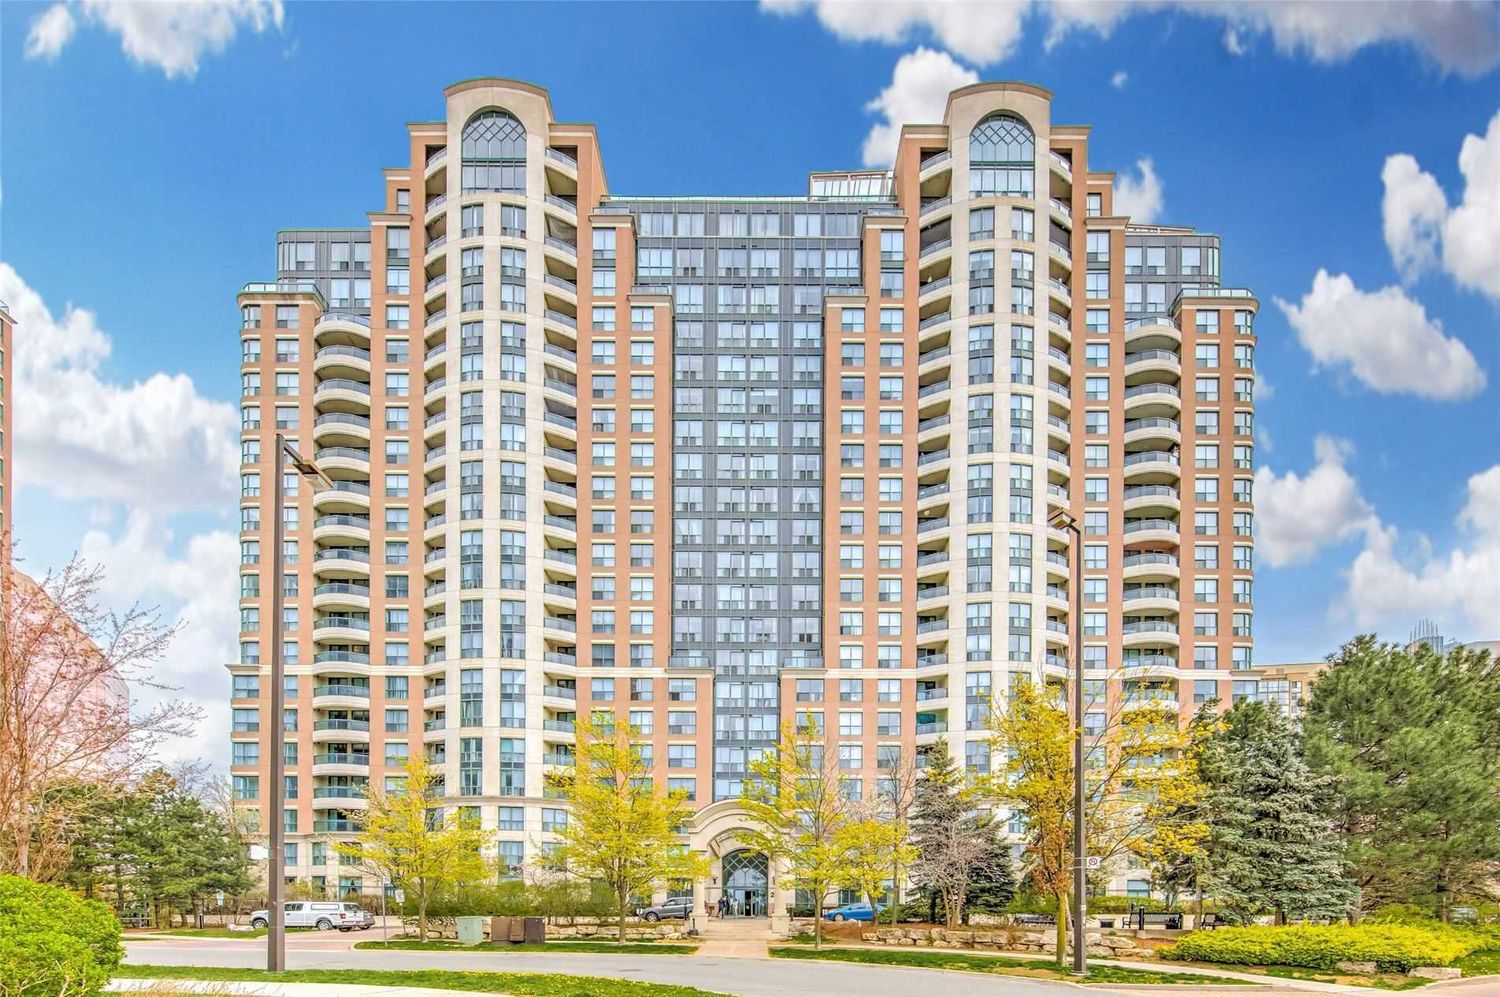 23 Lorraine Drive. Symphony Square Condos is located in  North York, Toronto - image #1 of 3